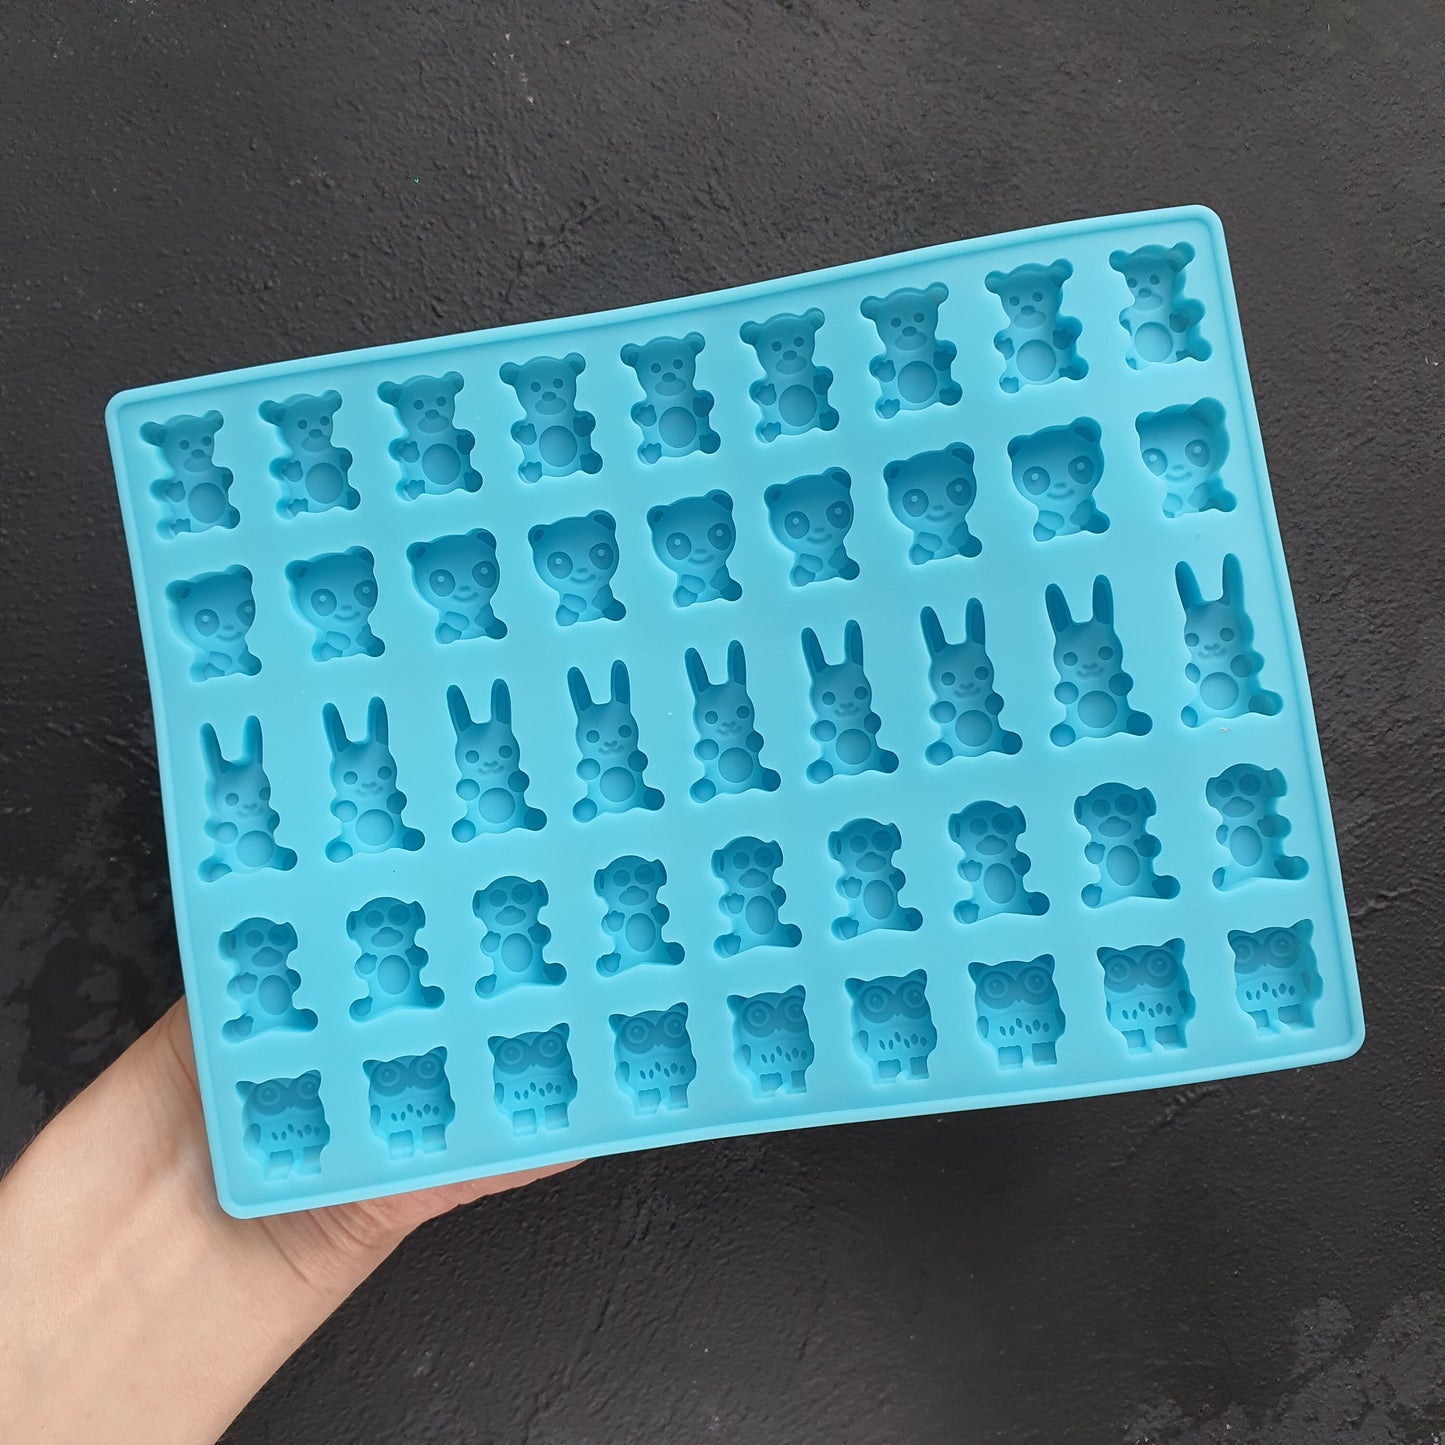 Silicone earrings mold "Animals" for resin and epoxy